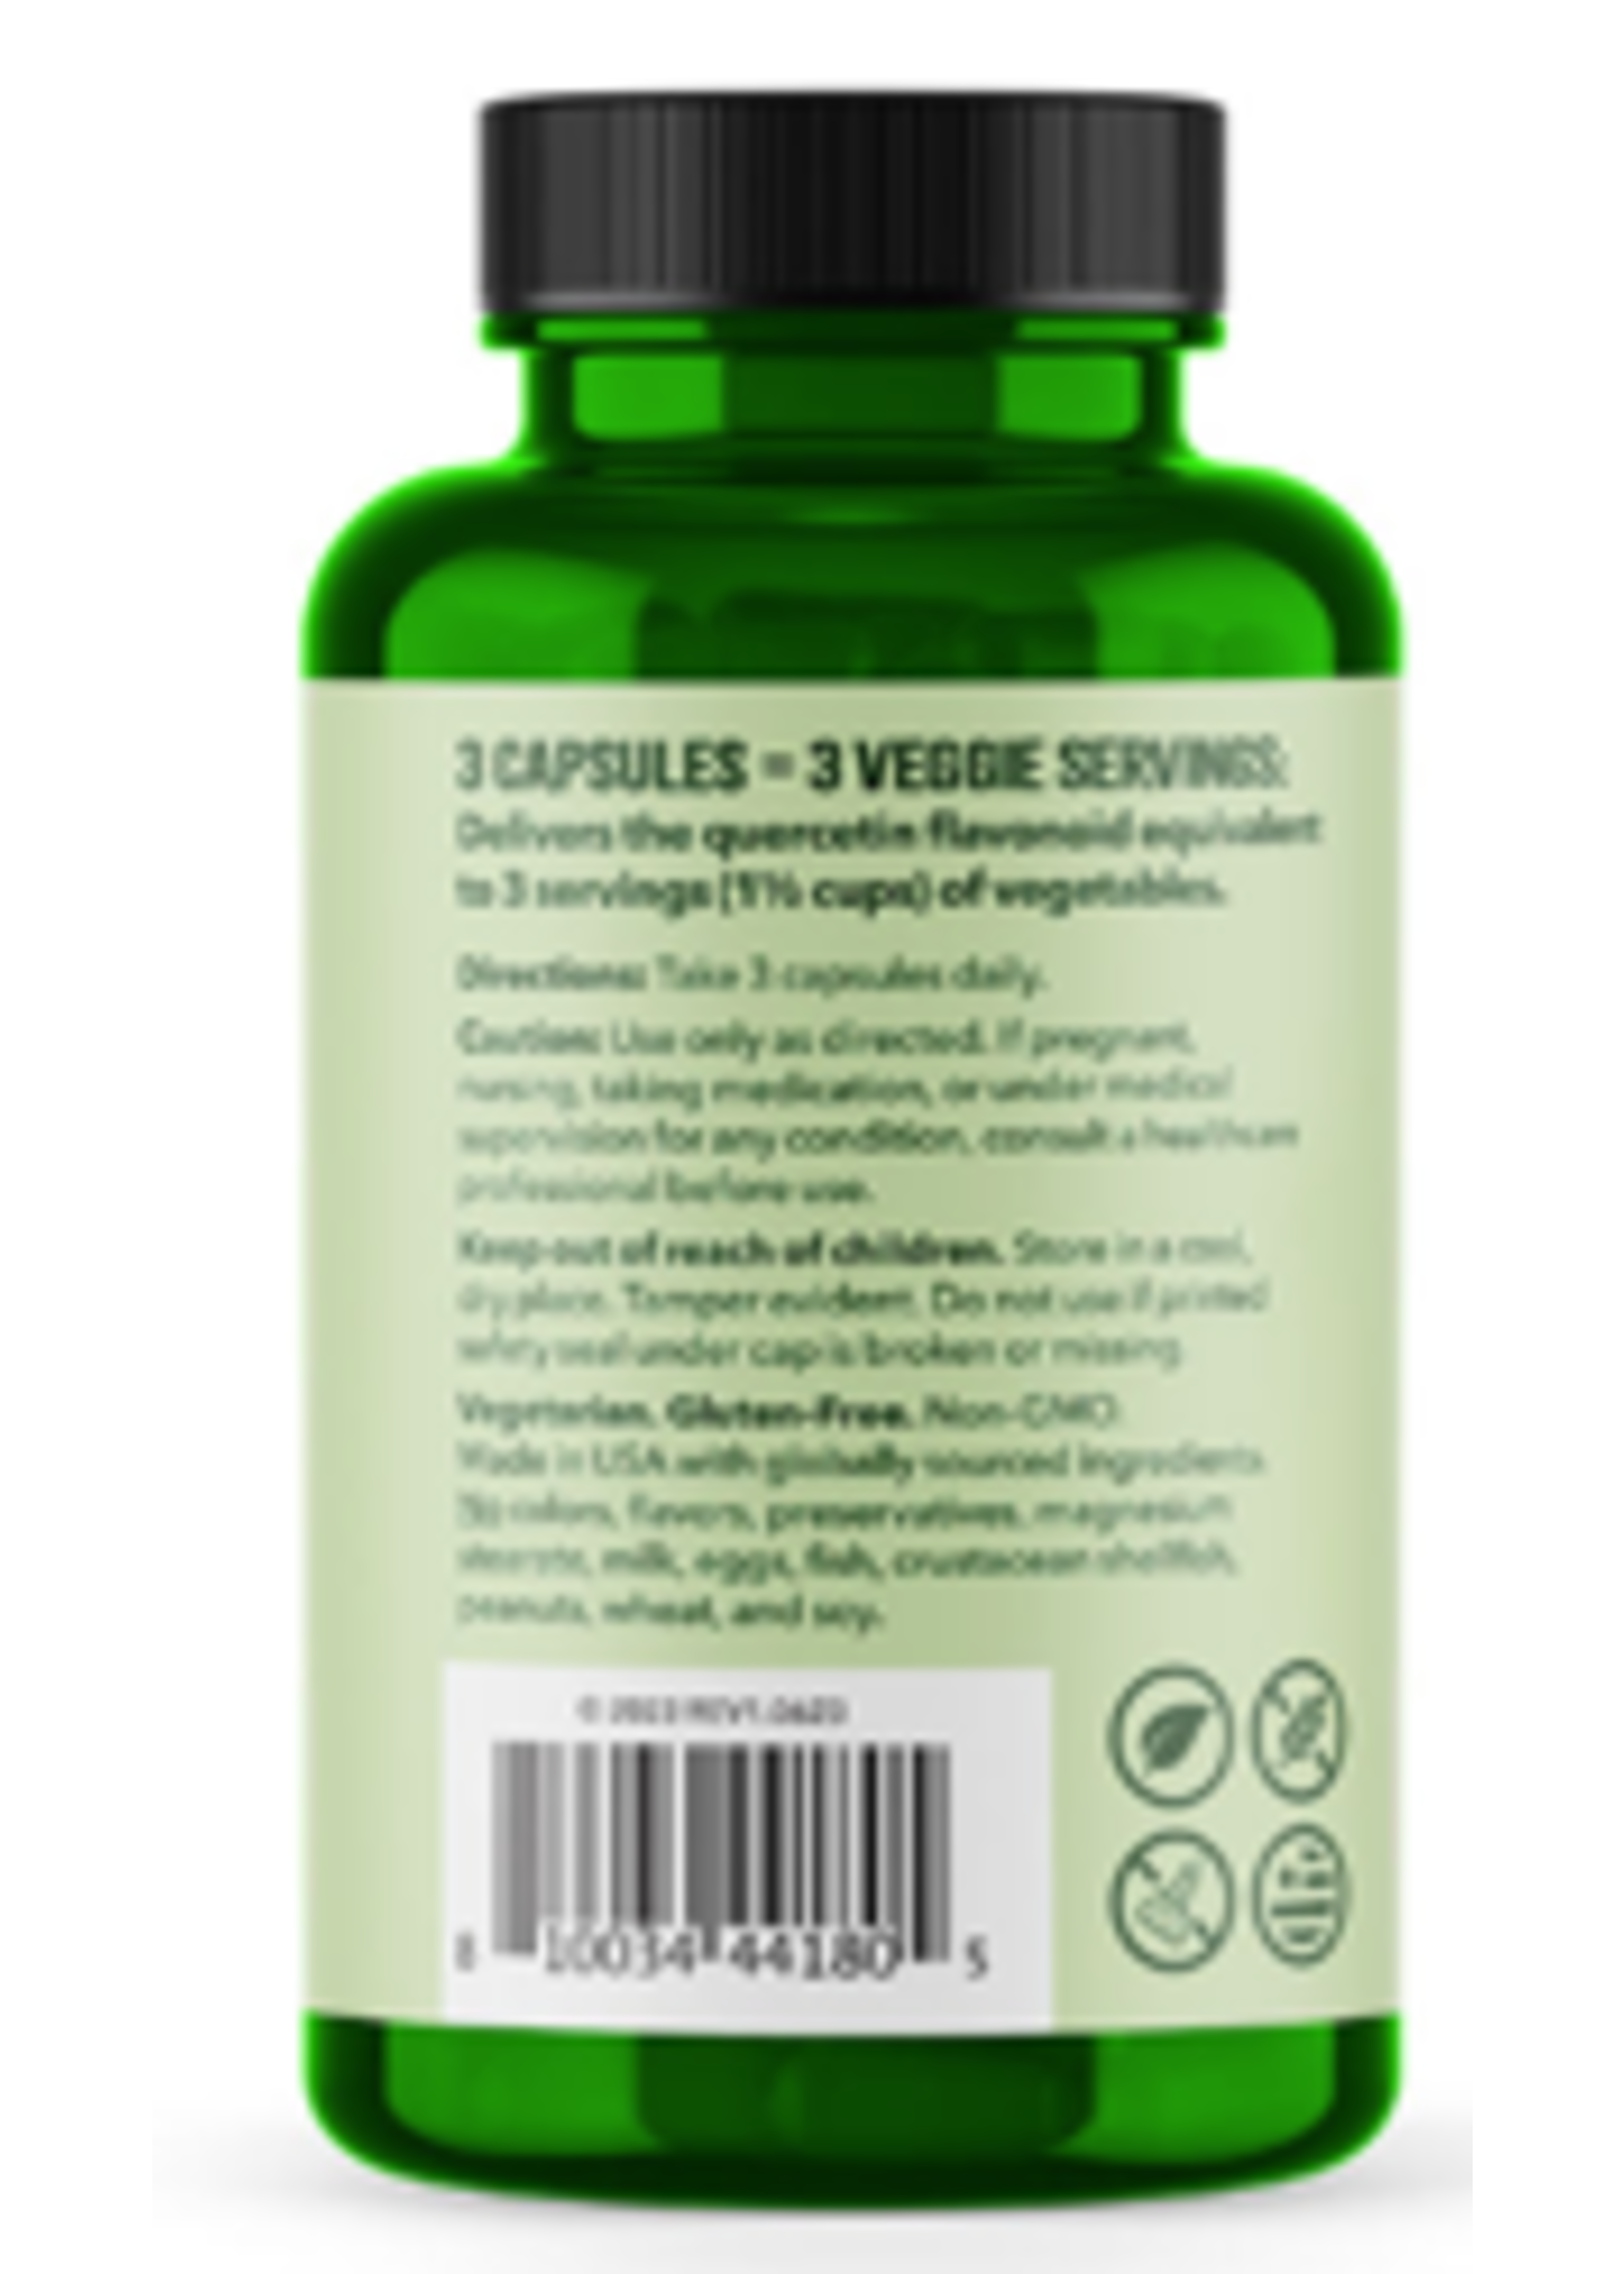 Life Seasons Veggie Boost 21 Veggies, Sprouts & Superfoods  90 vc